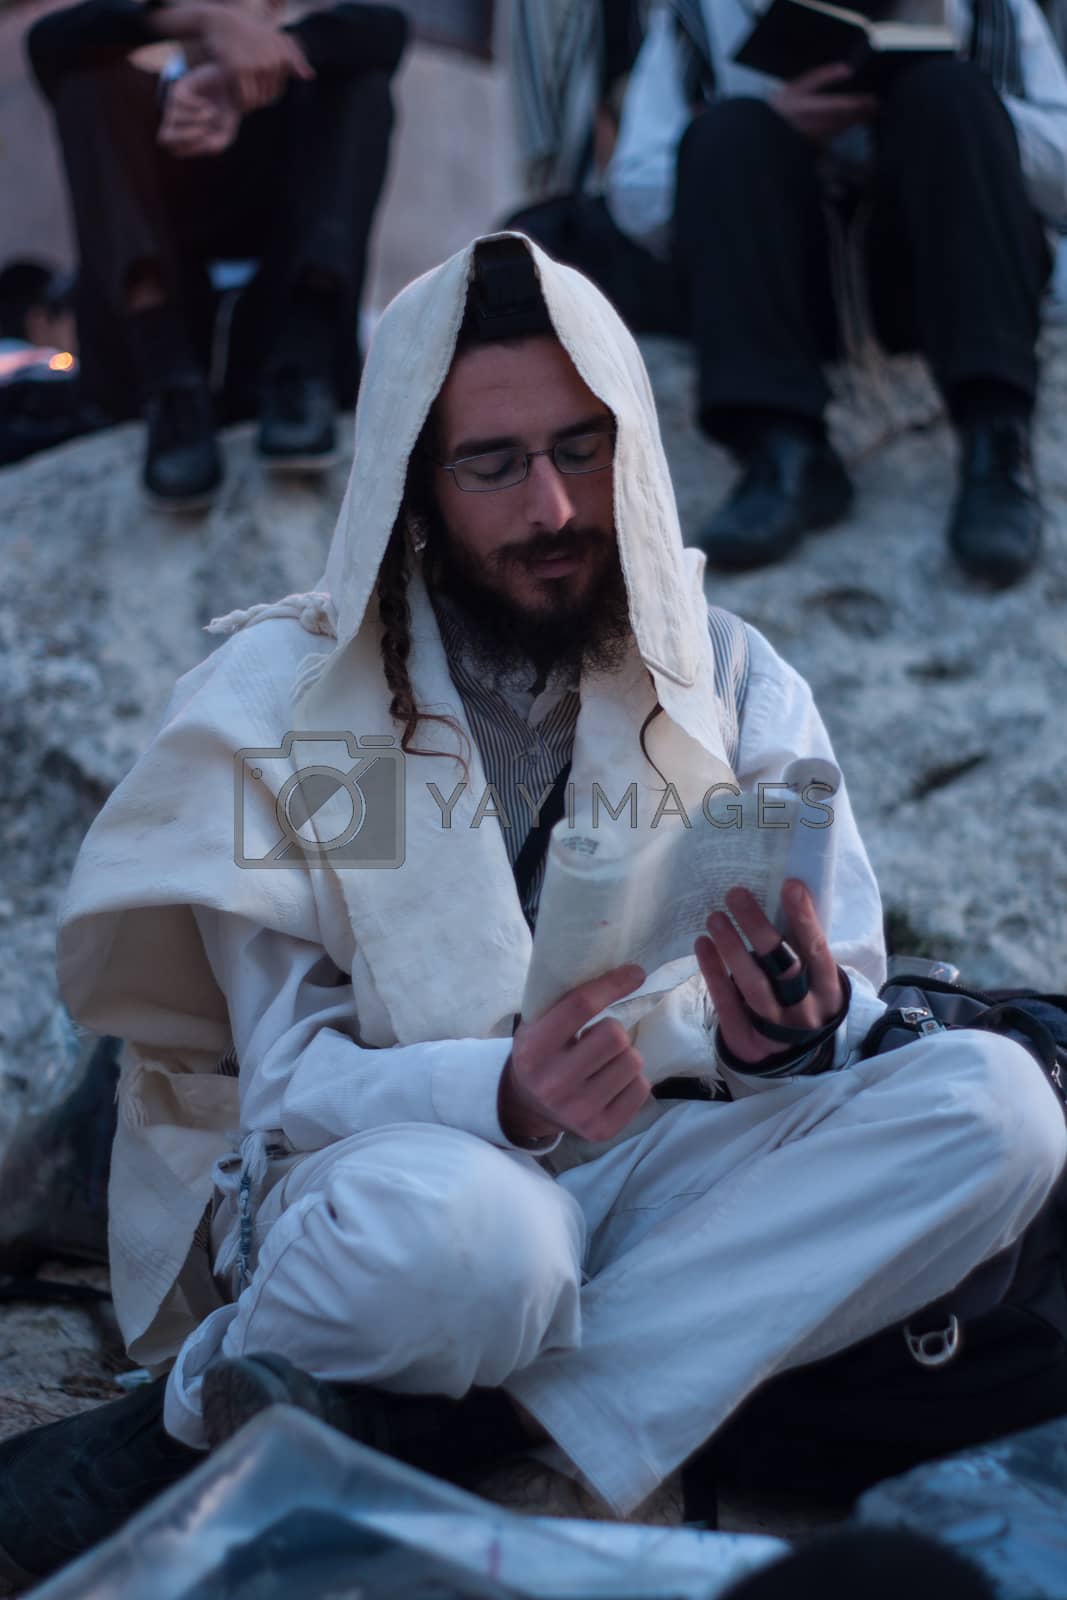 Royalty free image of Lag BaOmer on Mount Meron by RnDmS